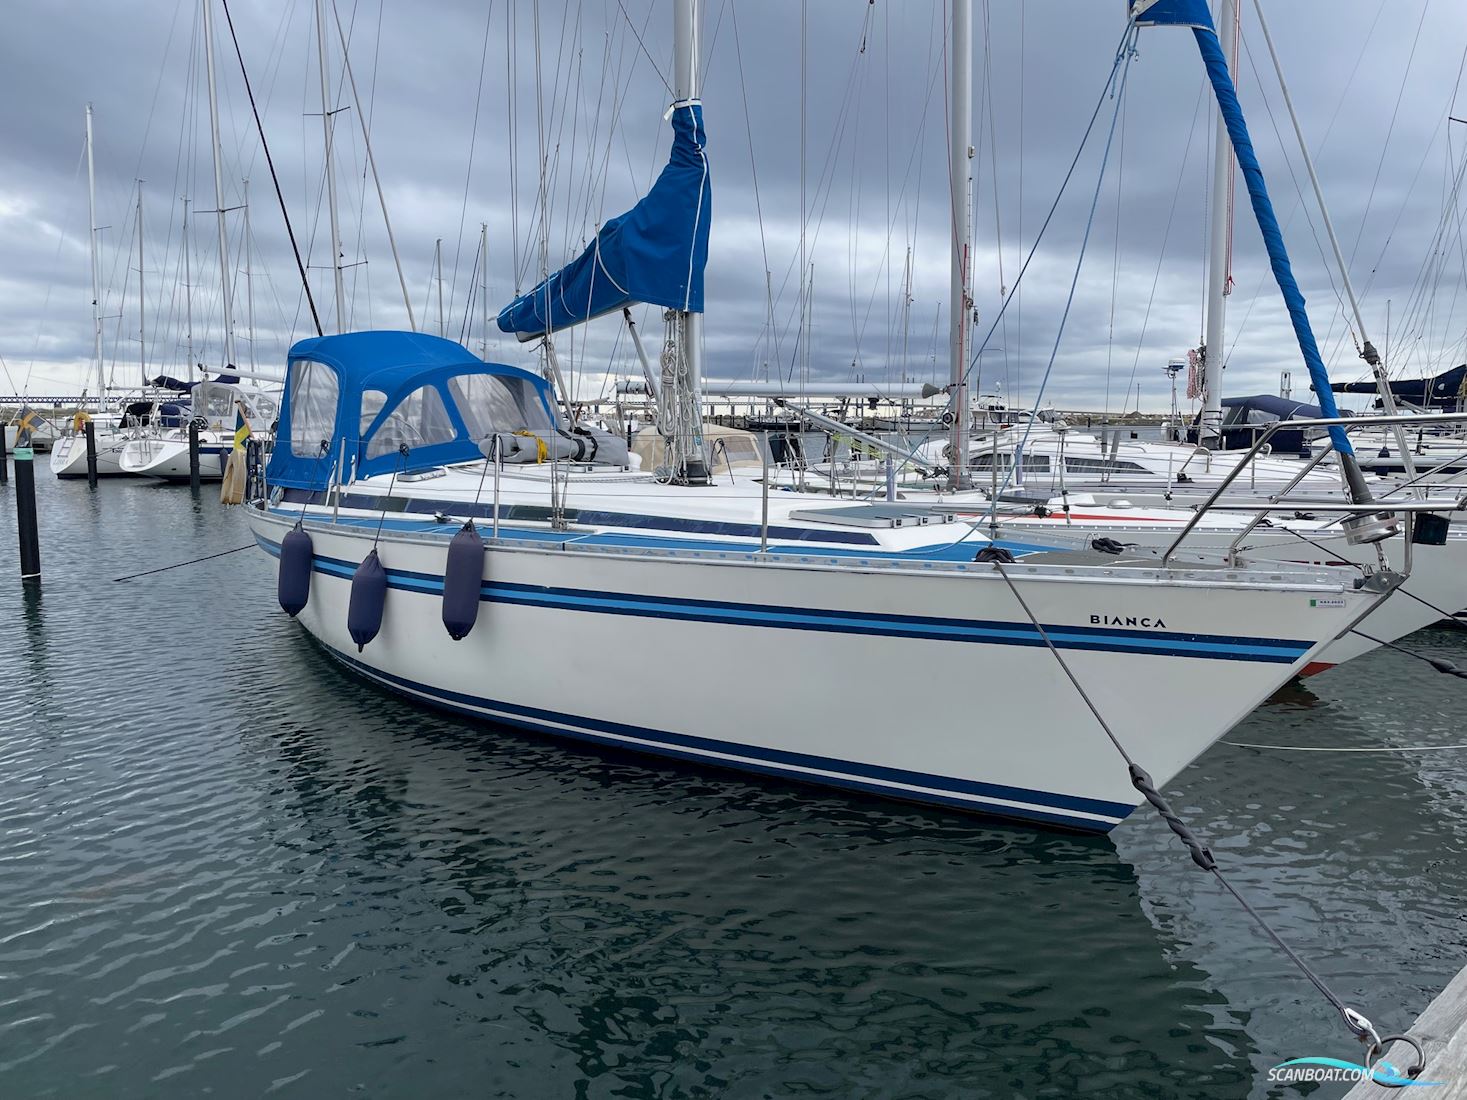 Bianca 107 Sailing boat 1987, with Yanmar 2GM20 engine, Sweden